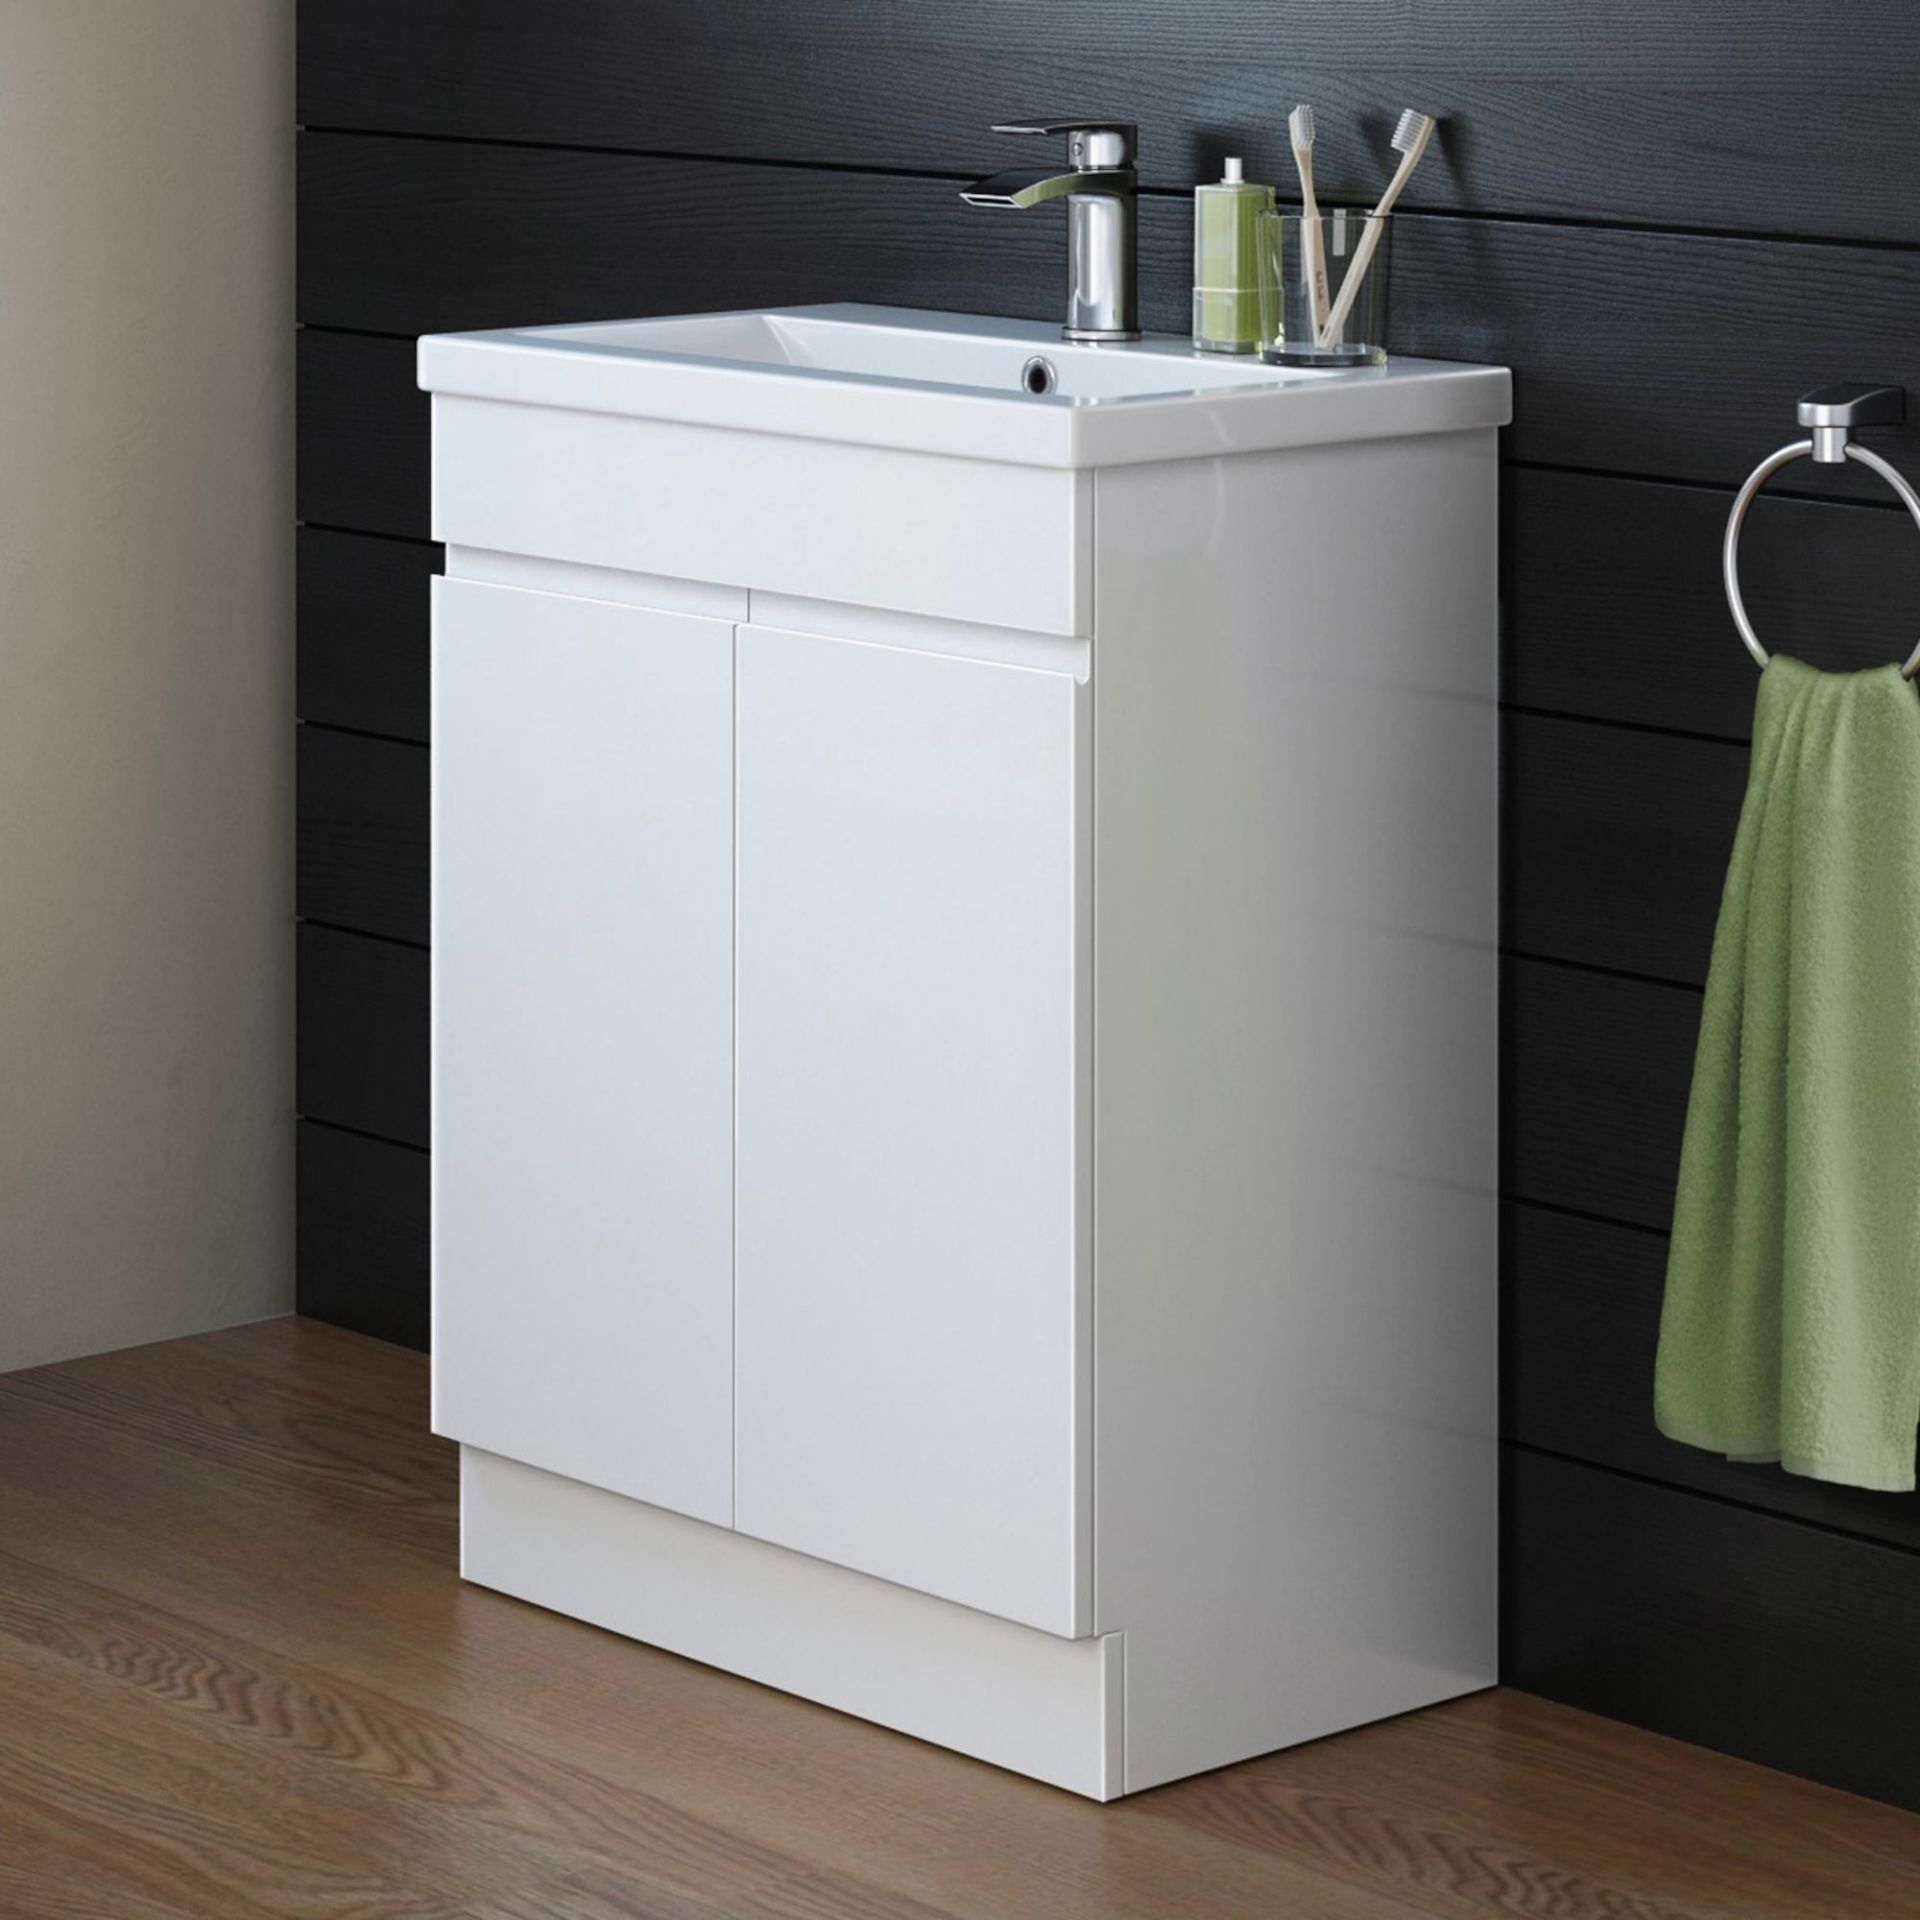 600mm Trent Gloss White Sink Cabinet - Floor Standing.RRP £499.99. Comes complete with basin. ... - Image 2 of 3